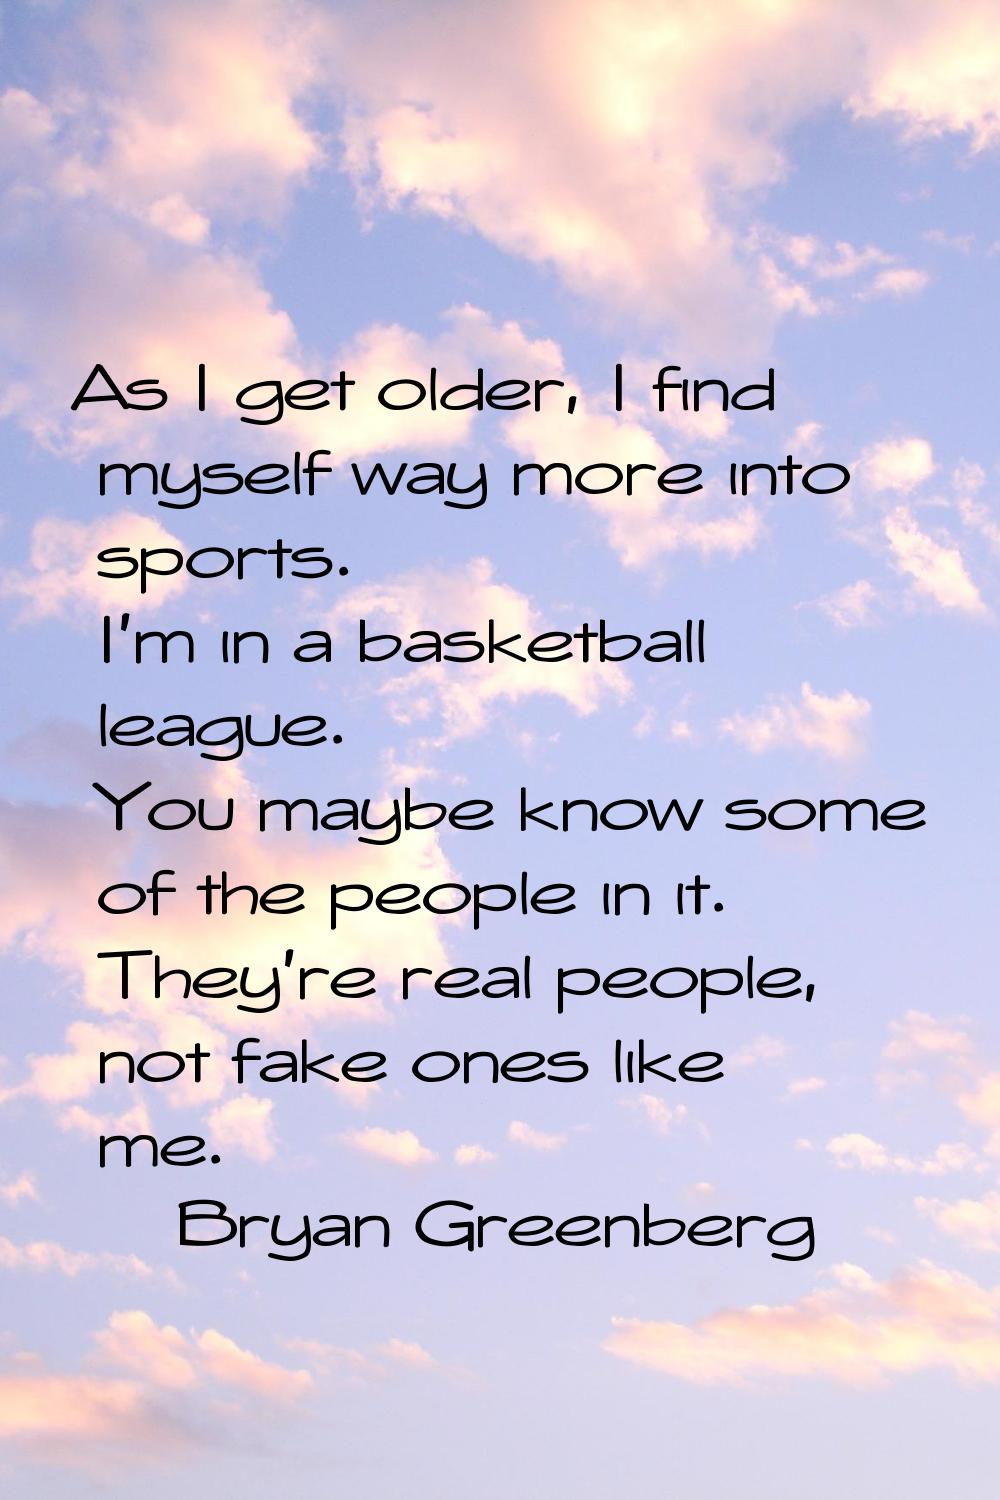 As I get older, I find myself way more into sports. I'm in a basketball league. You maybe know some